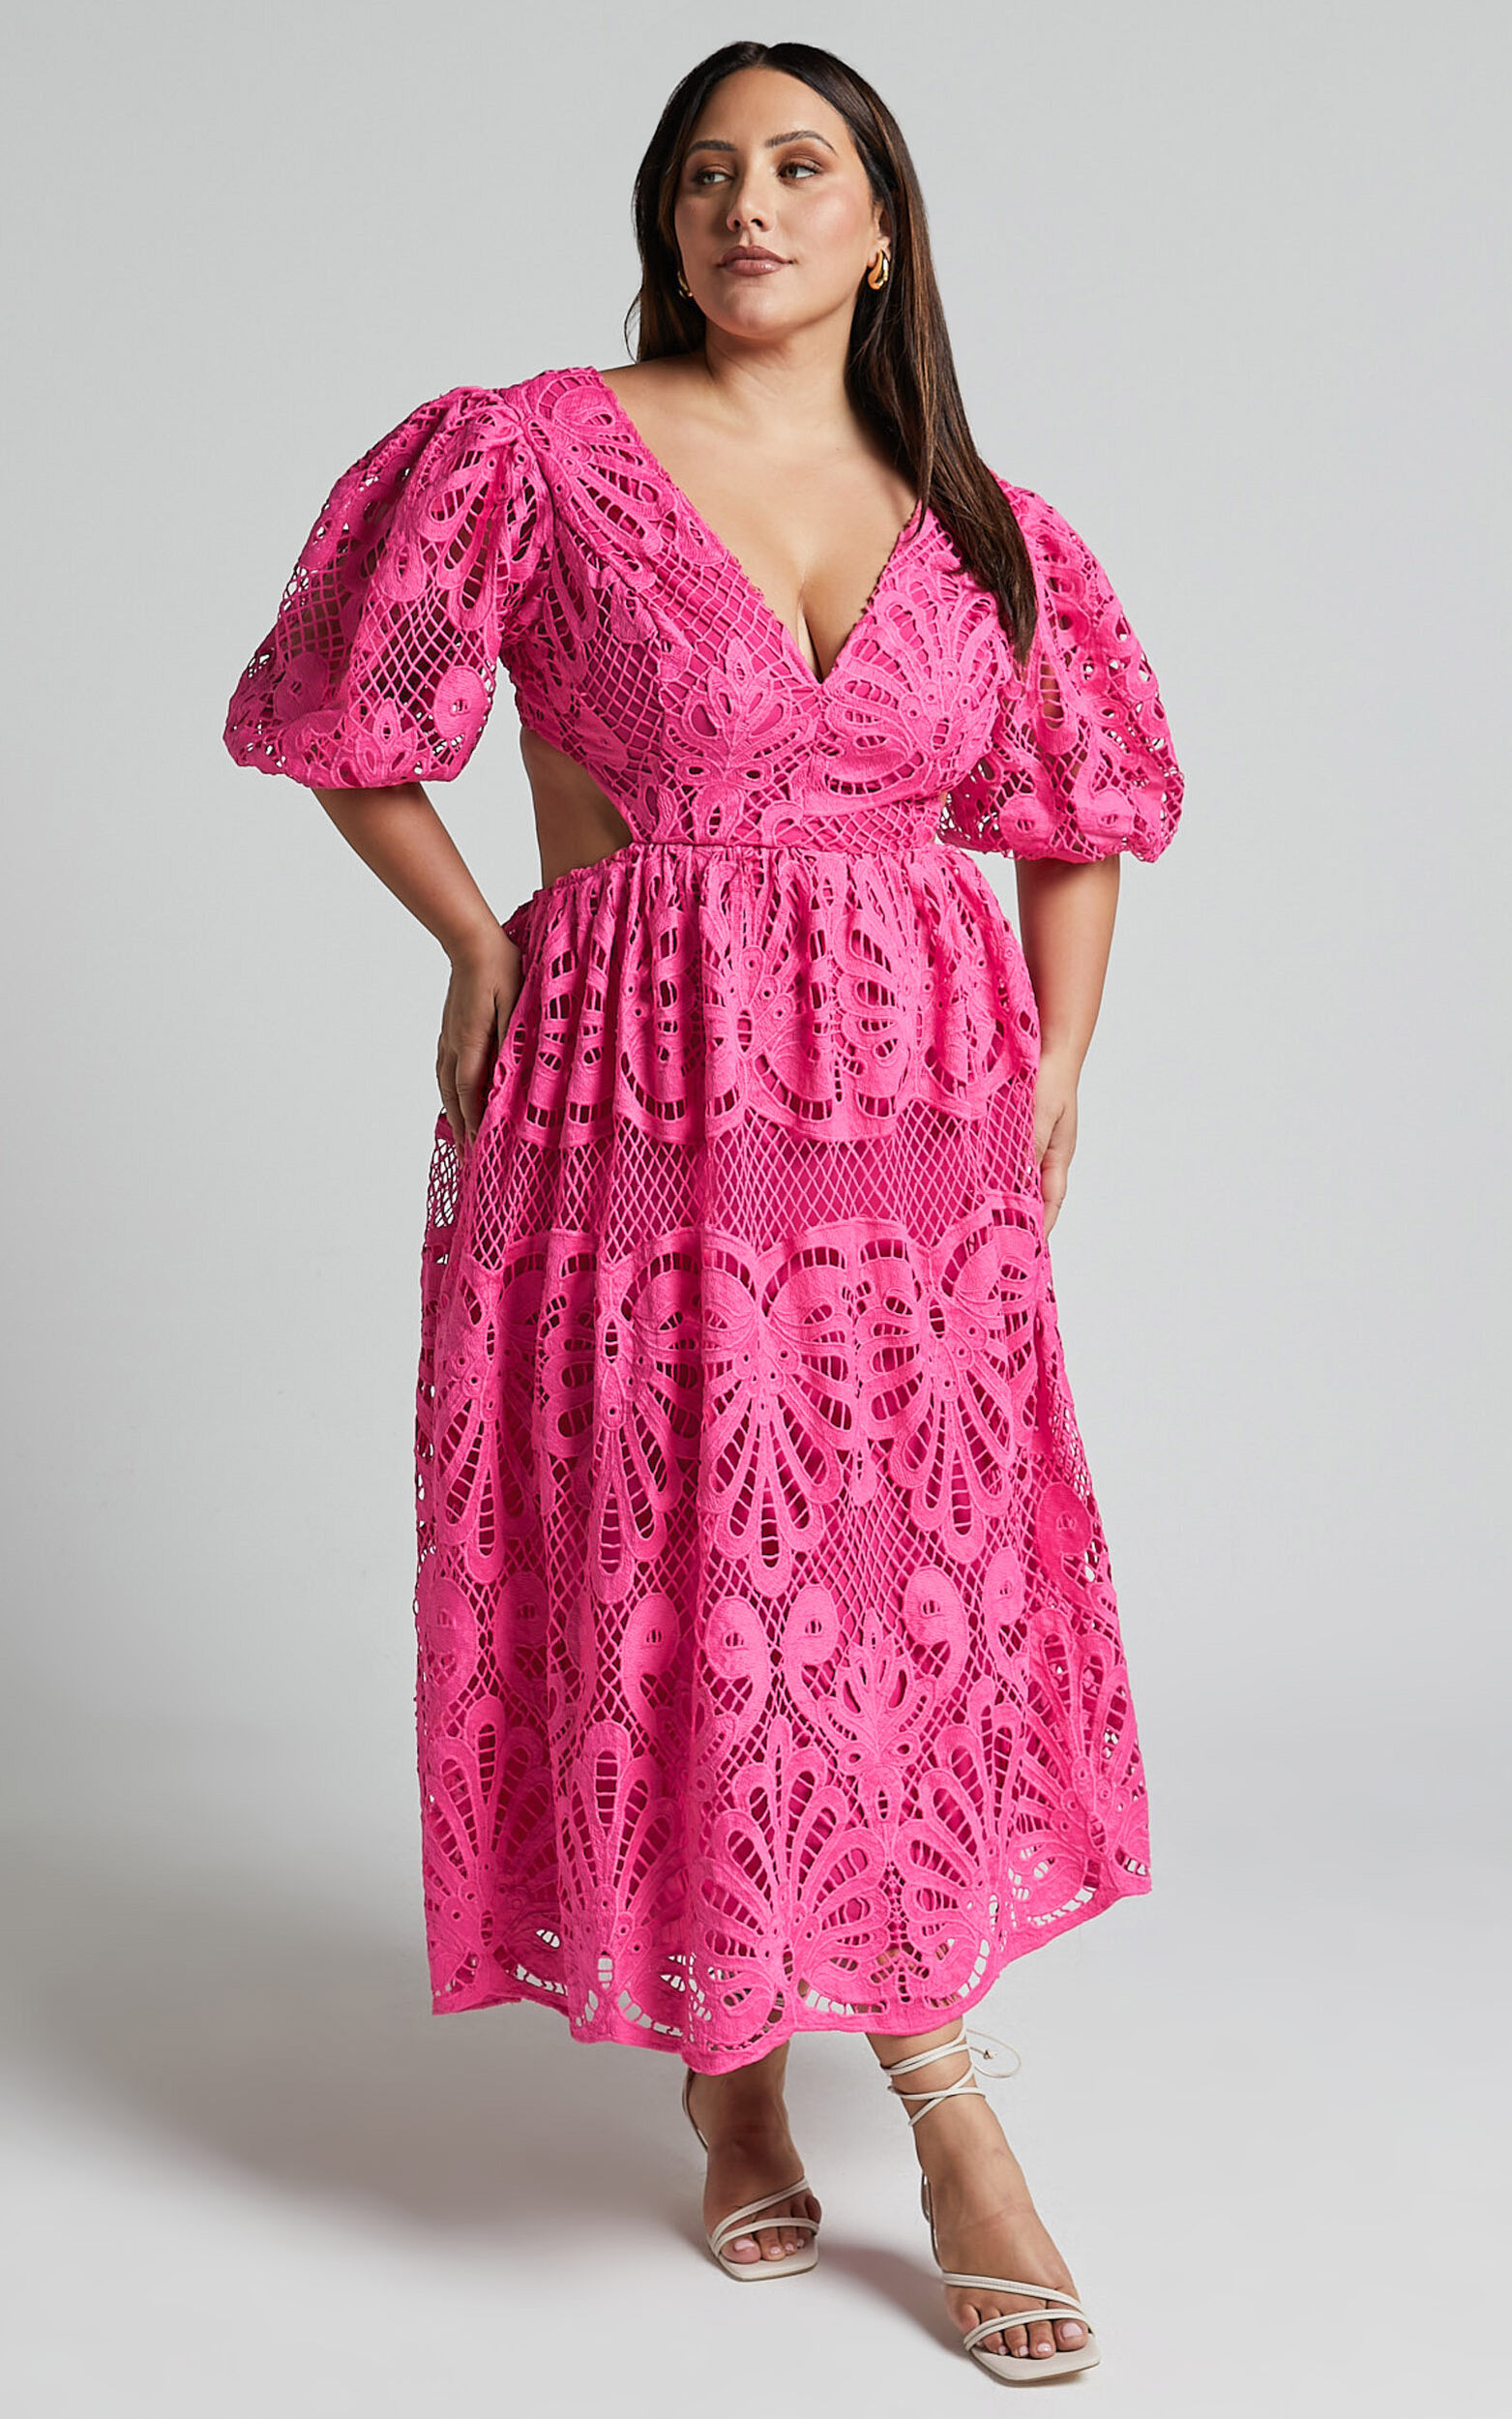 Anieshaya Midi Dress - V Neck Cut Out Lace Dress in Pink